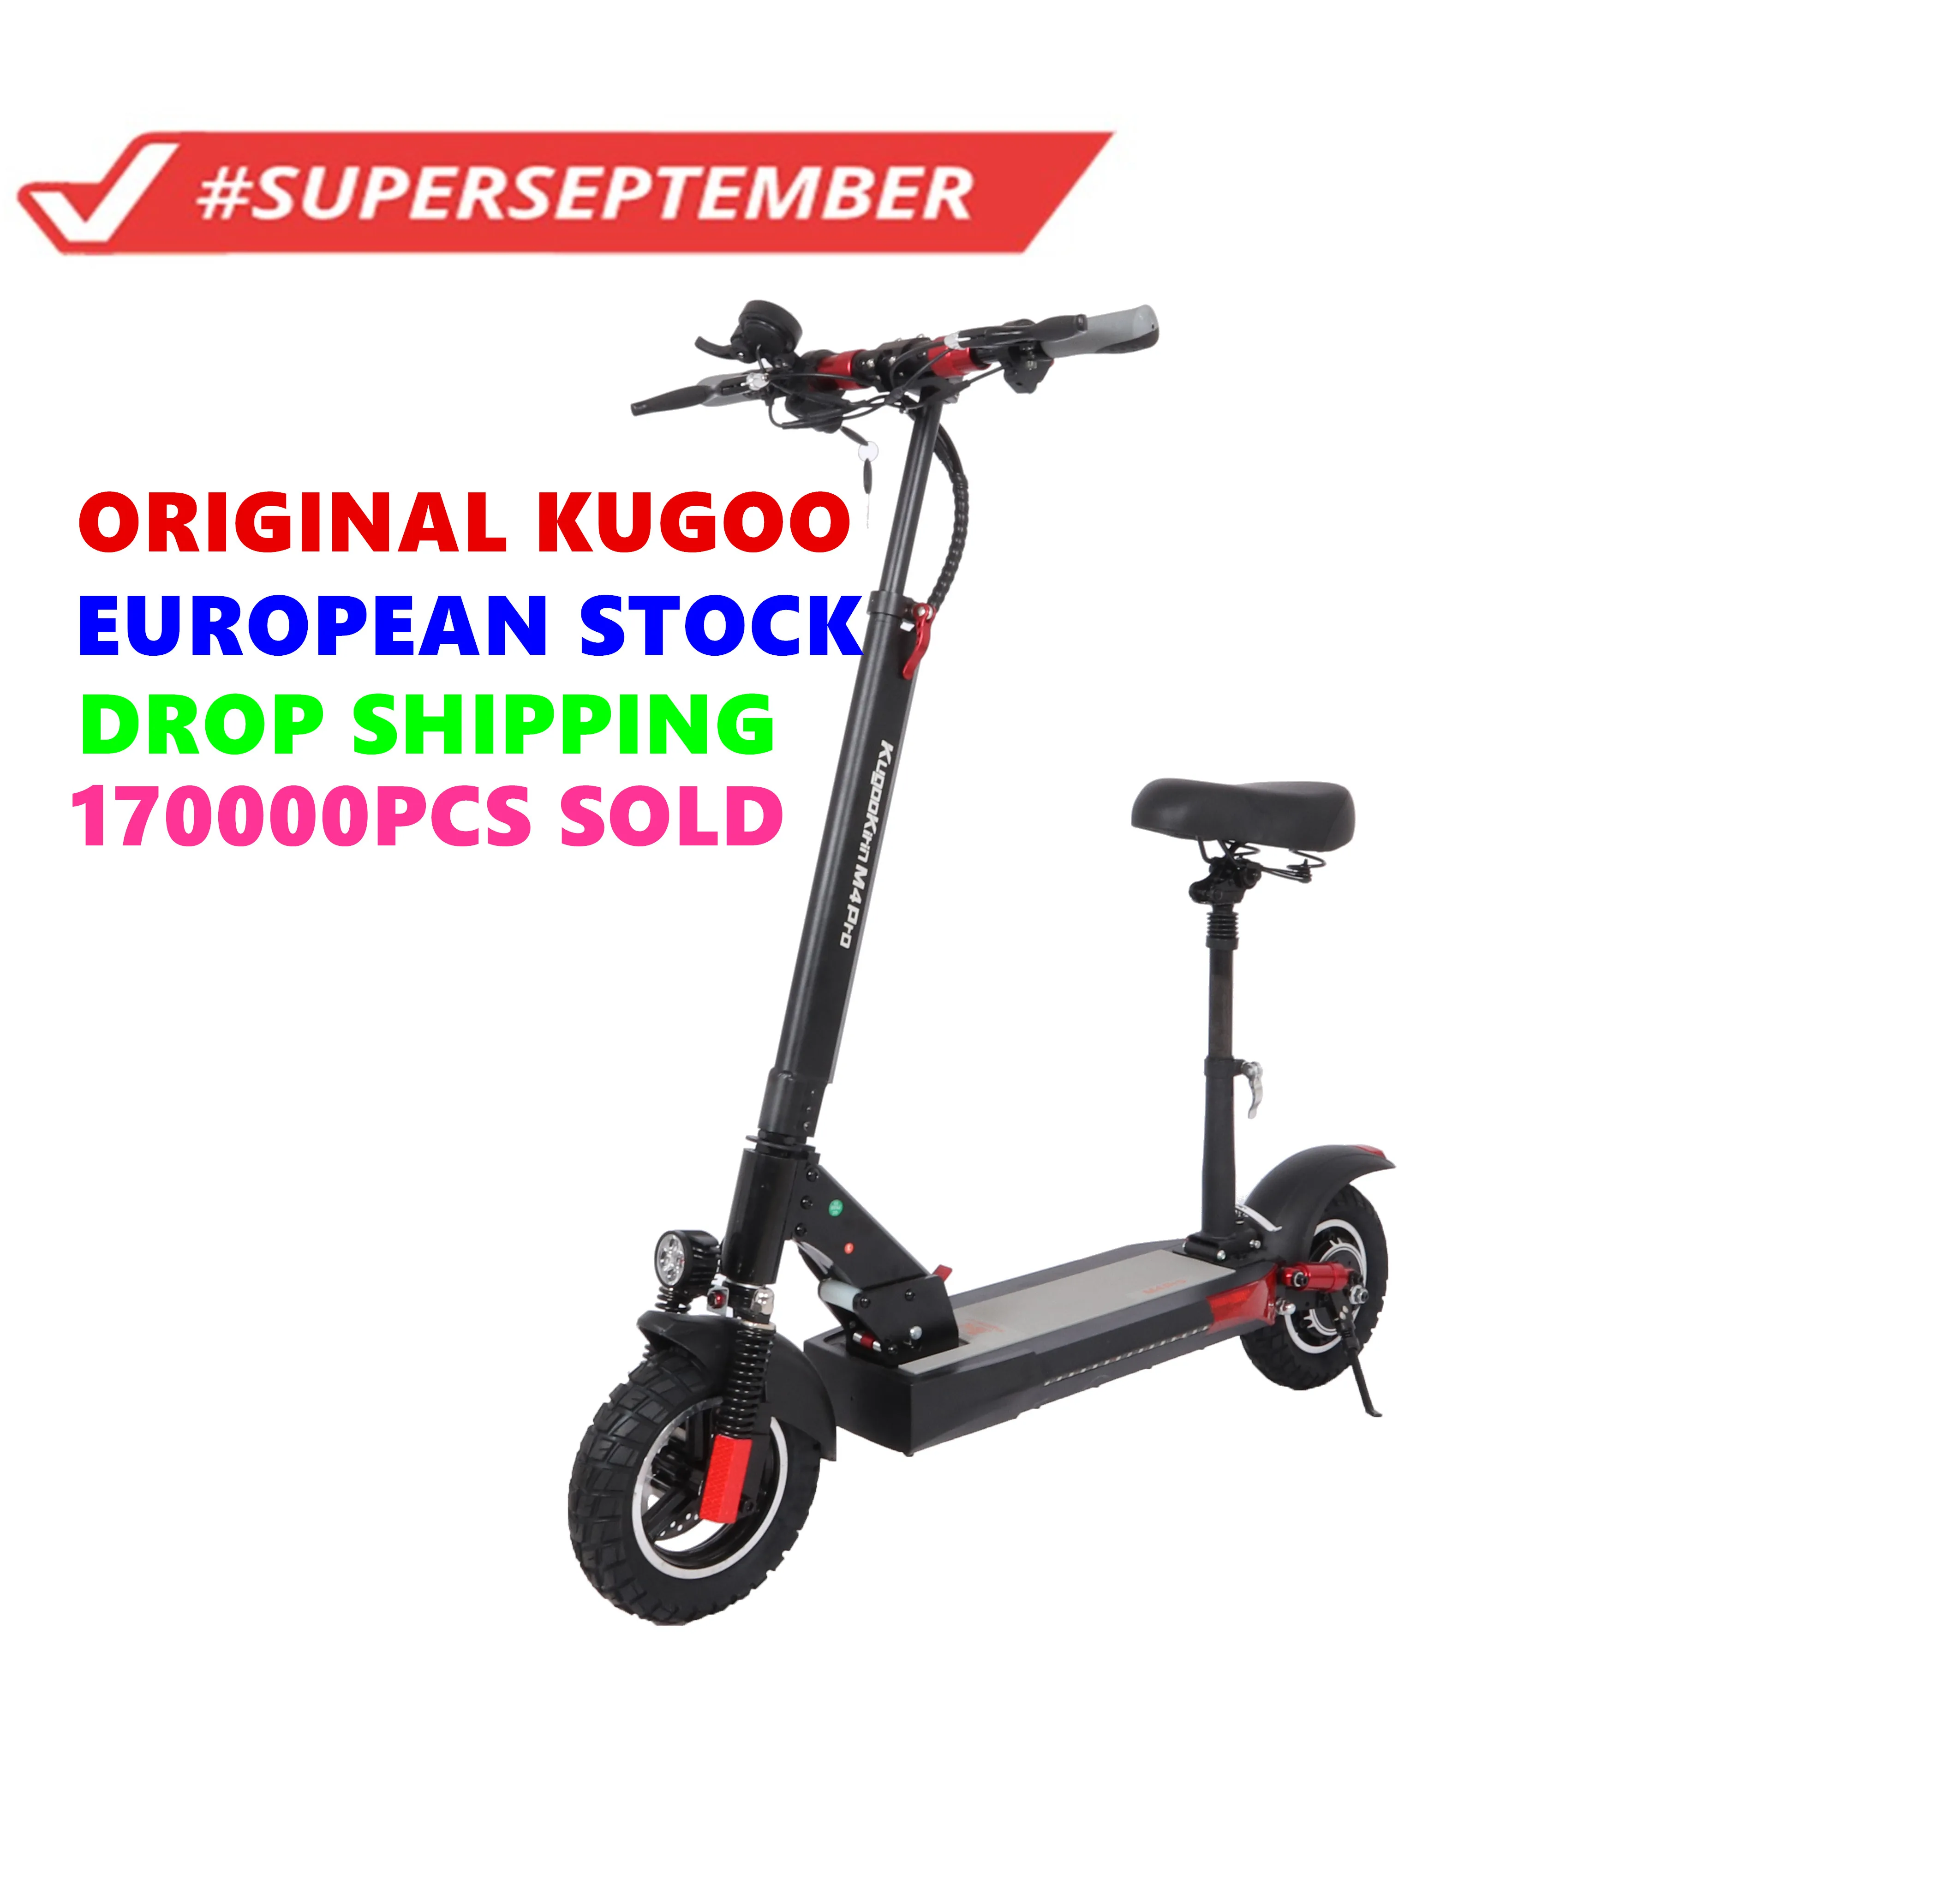 

2022 new EU warehouse Kugoo Kirin M4 pro 18ah 500w adult off road electric scooters with dropshipping service